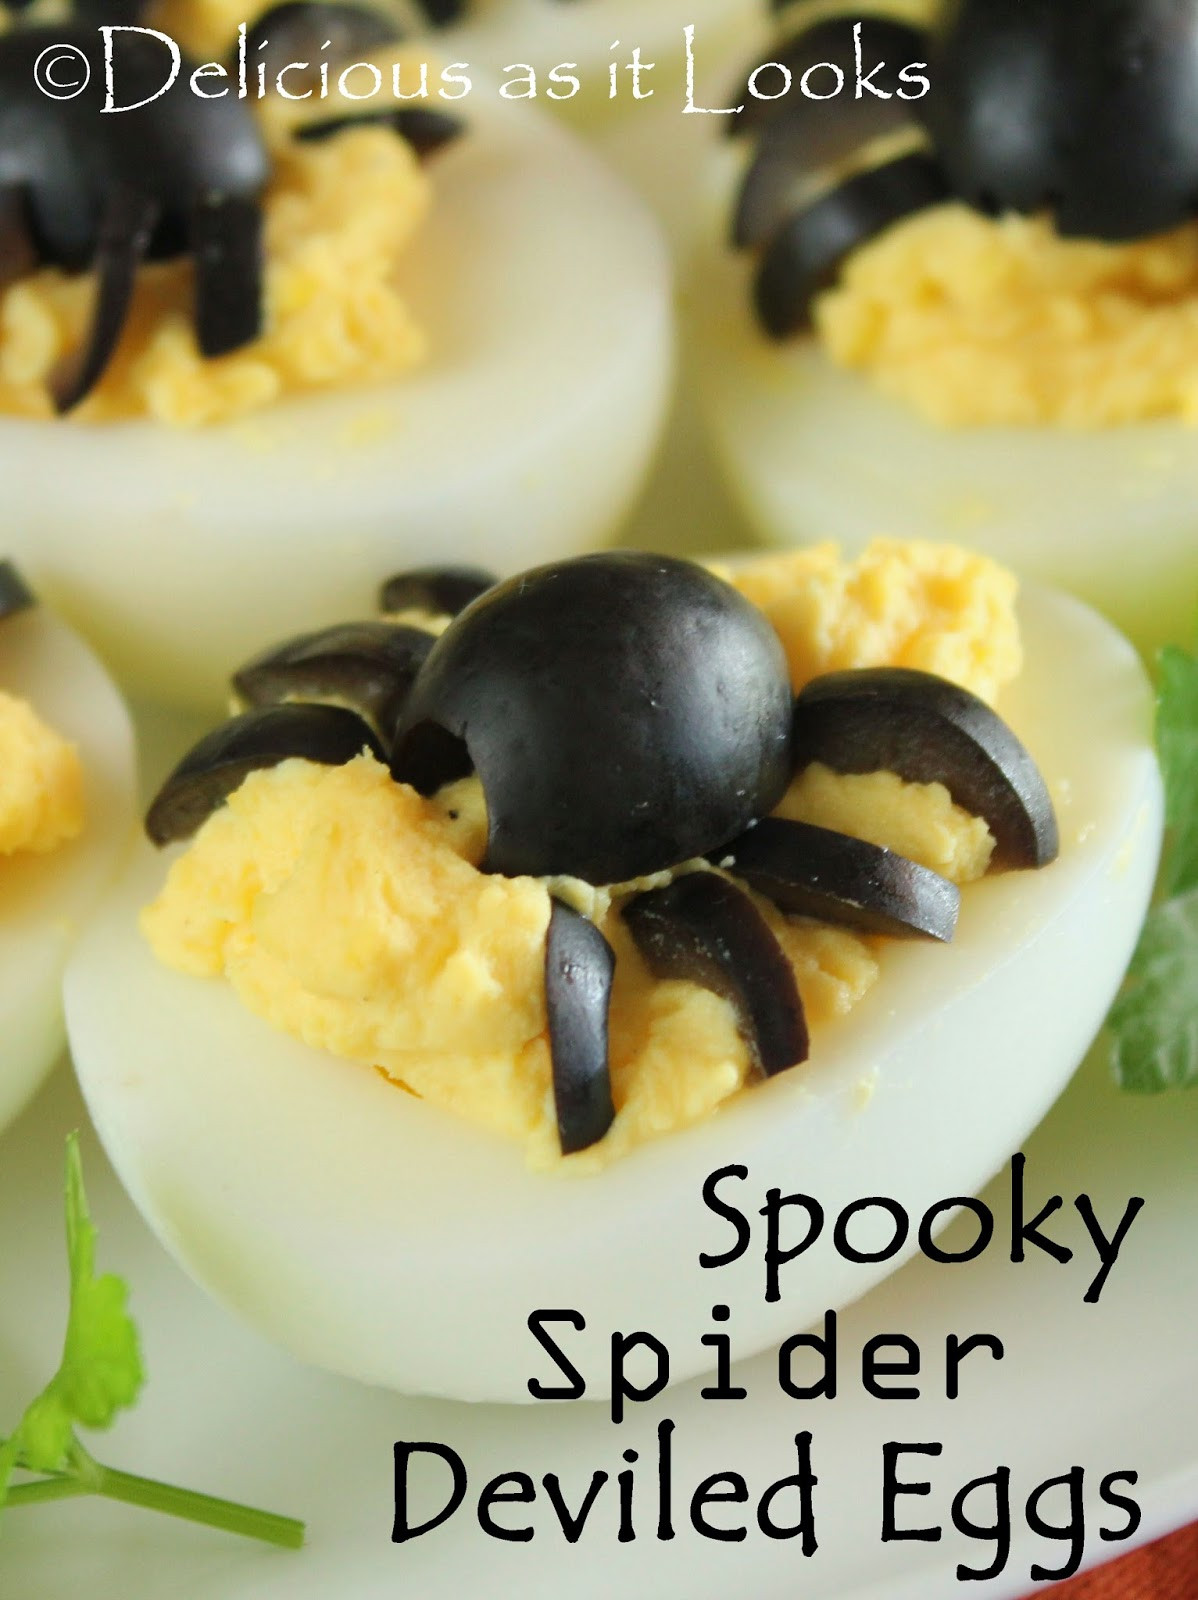 Deviled Eggs Spider Halloween
 Delicious as it Looks Halloween Spooky Spider Deviled Eggs